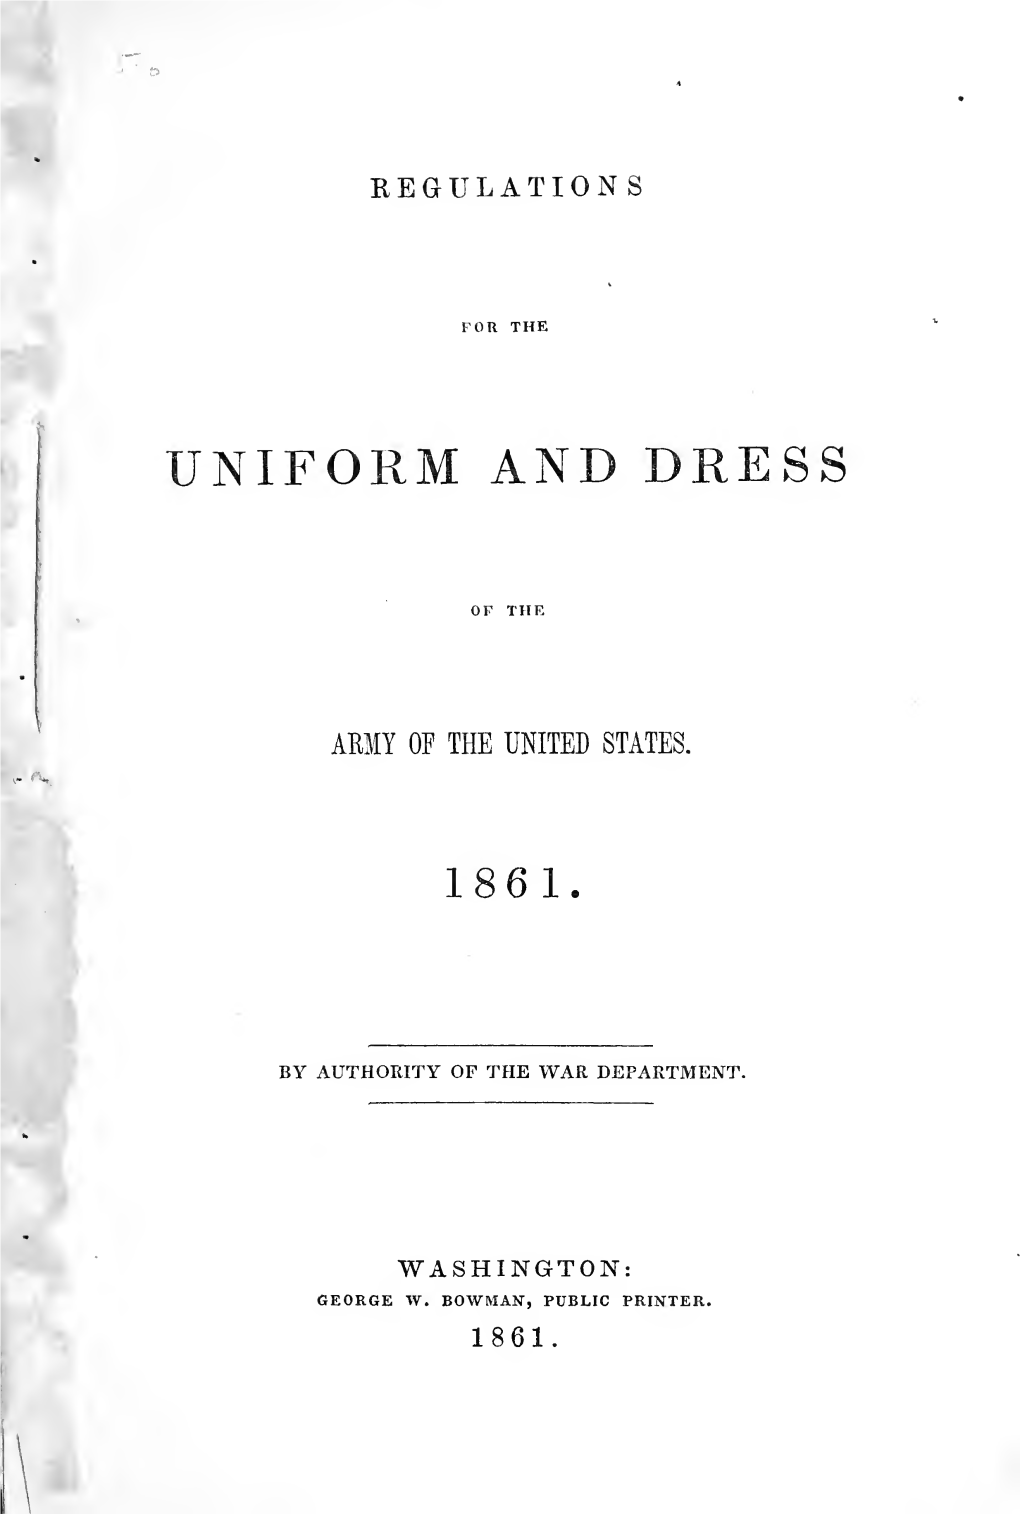 Regulations for the Uniform and Dress of the Army of the United States, 1861